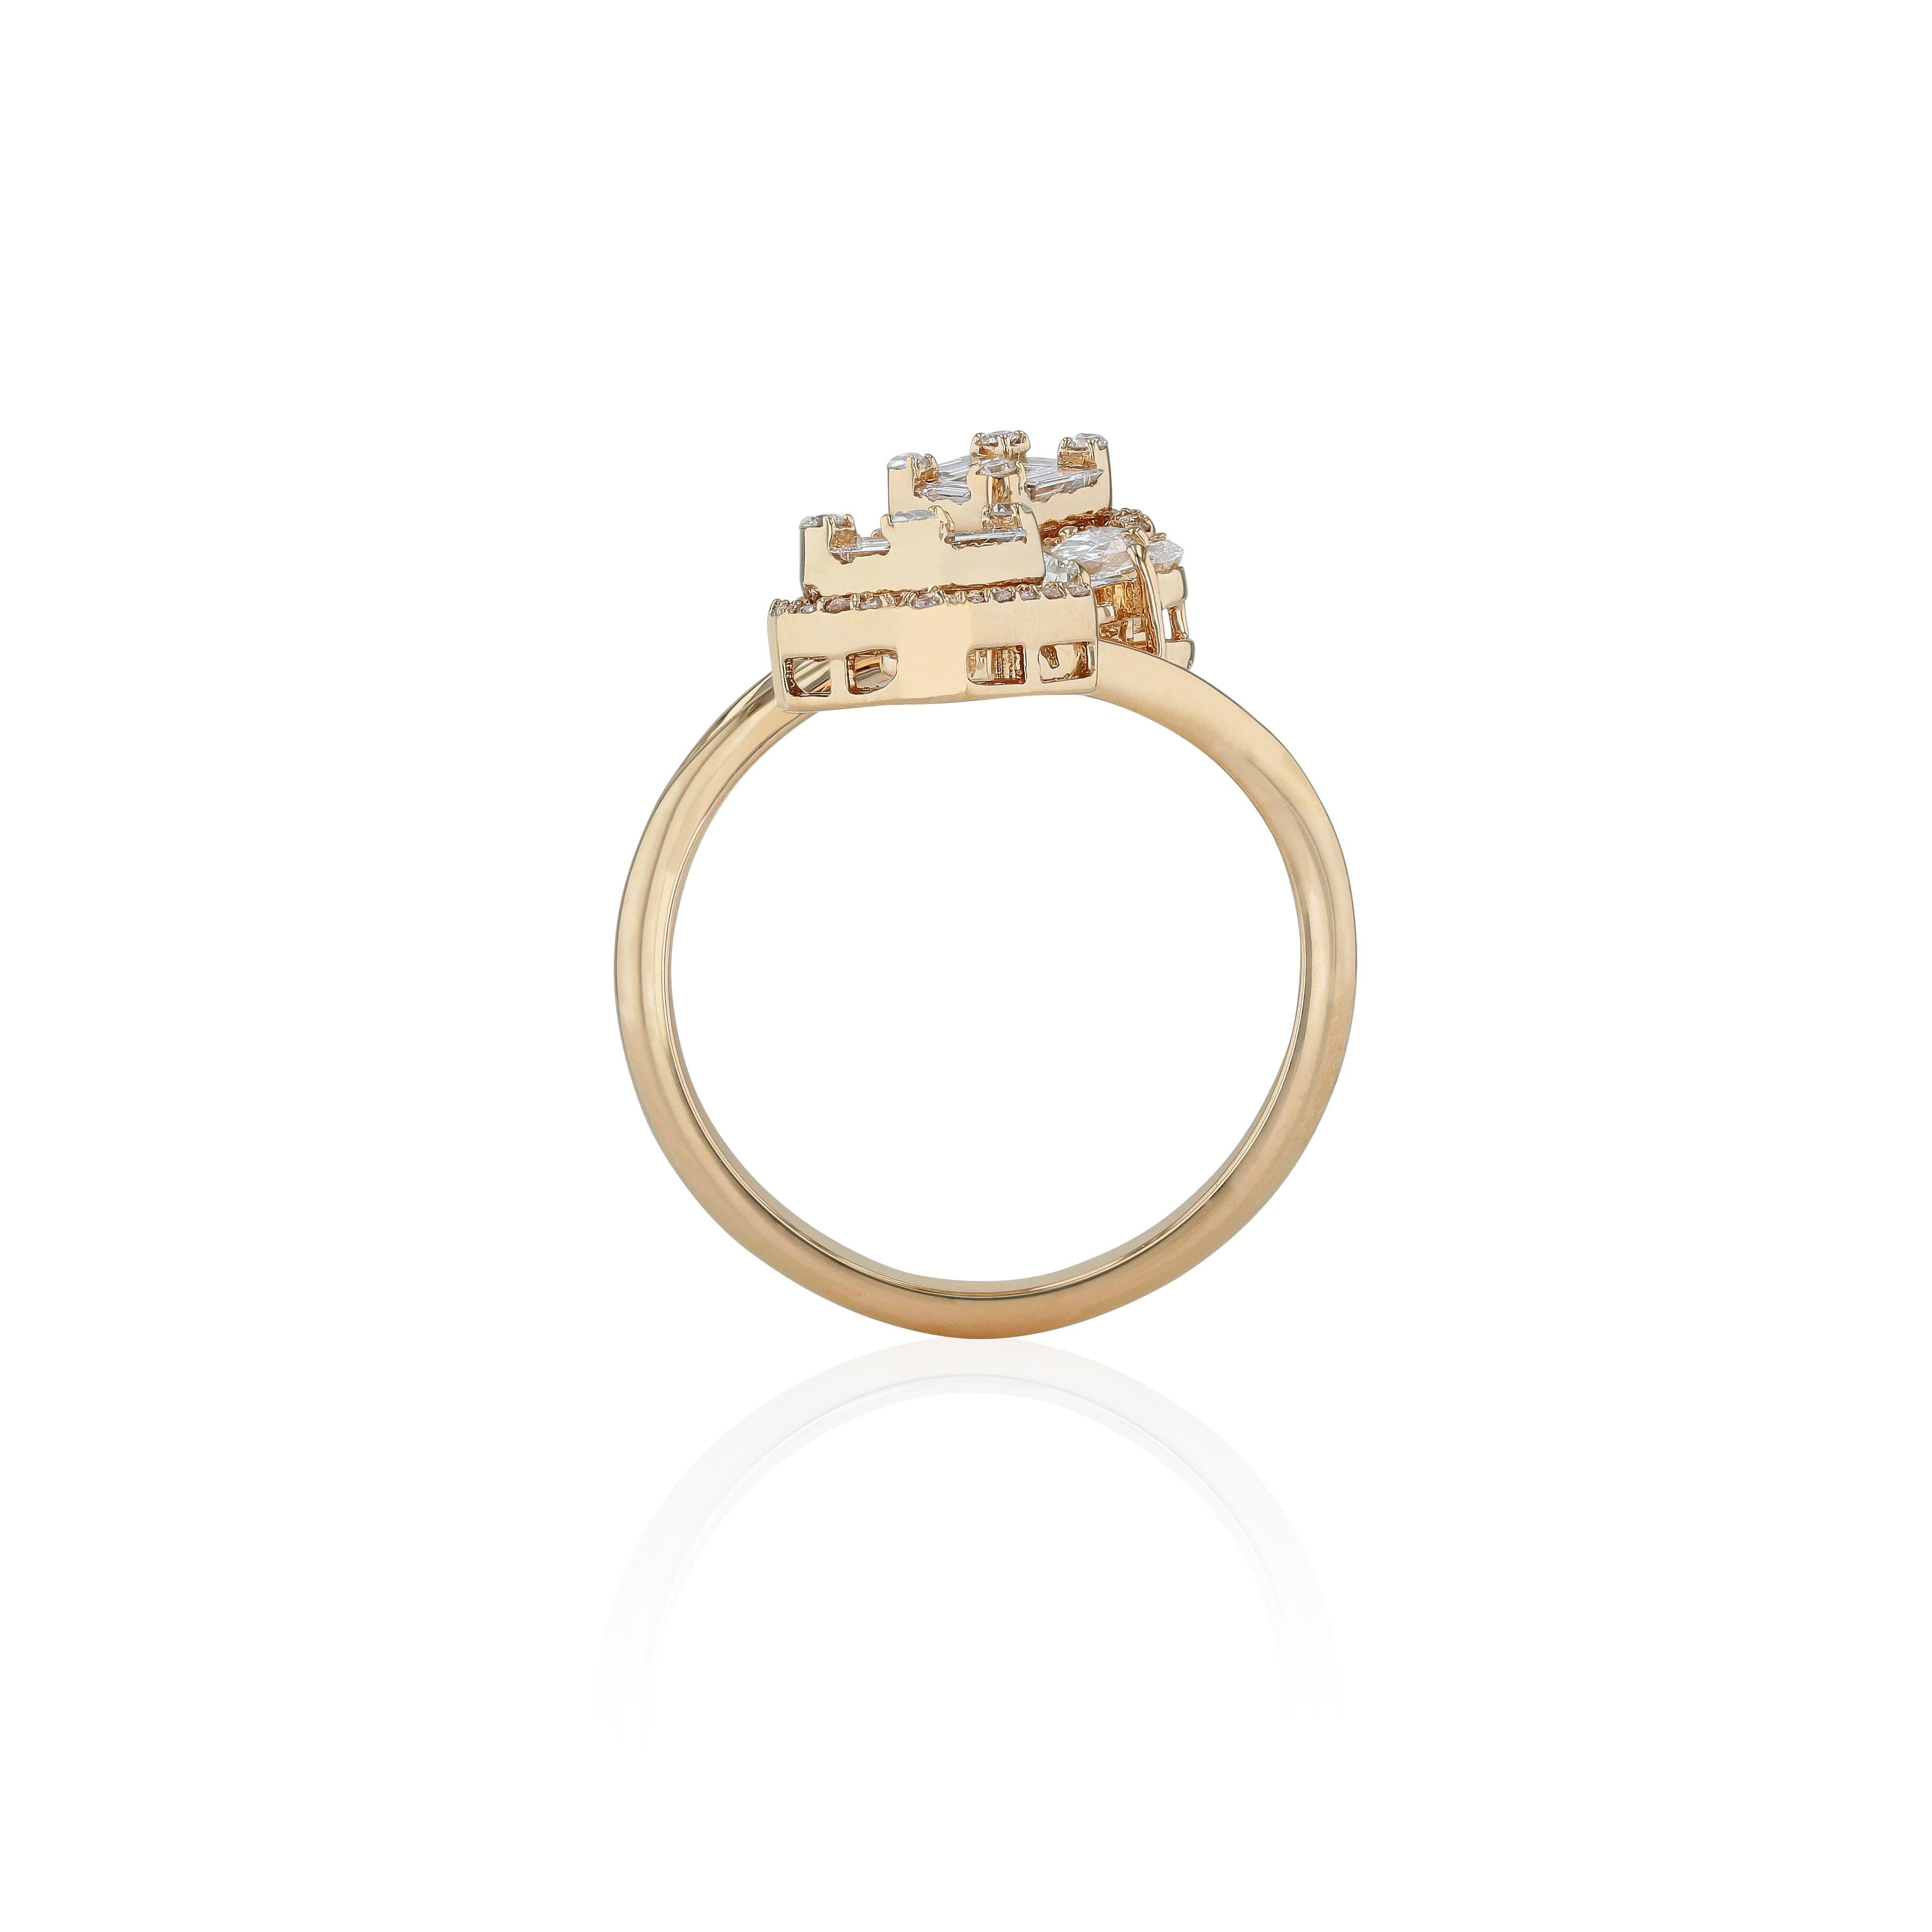 Artistic, unique, vintage-inspired design ring by Amwaj jewelry made of pear, round and baguette diamonds that are adding a perfect sparkle to this fashionable ring. This piece of art is a refined example of the sharp vision of femininity adorned